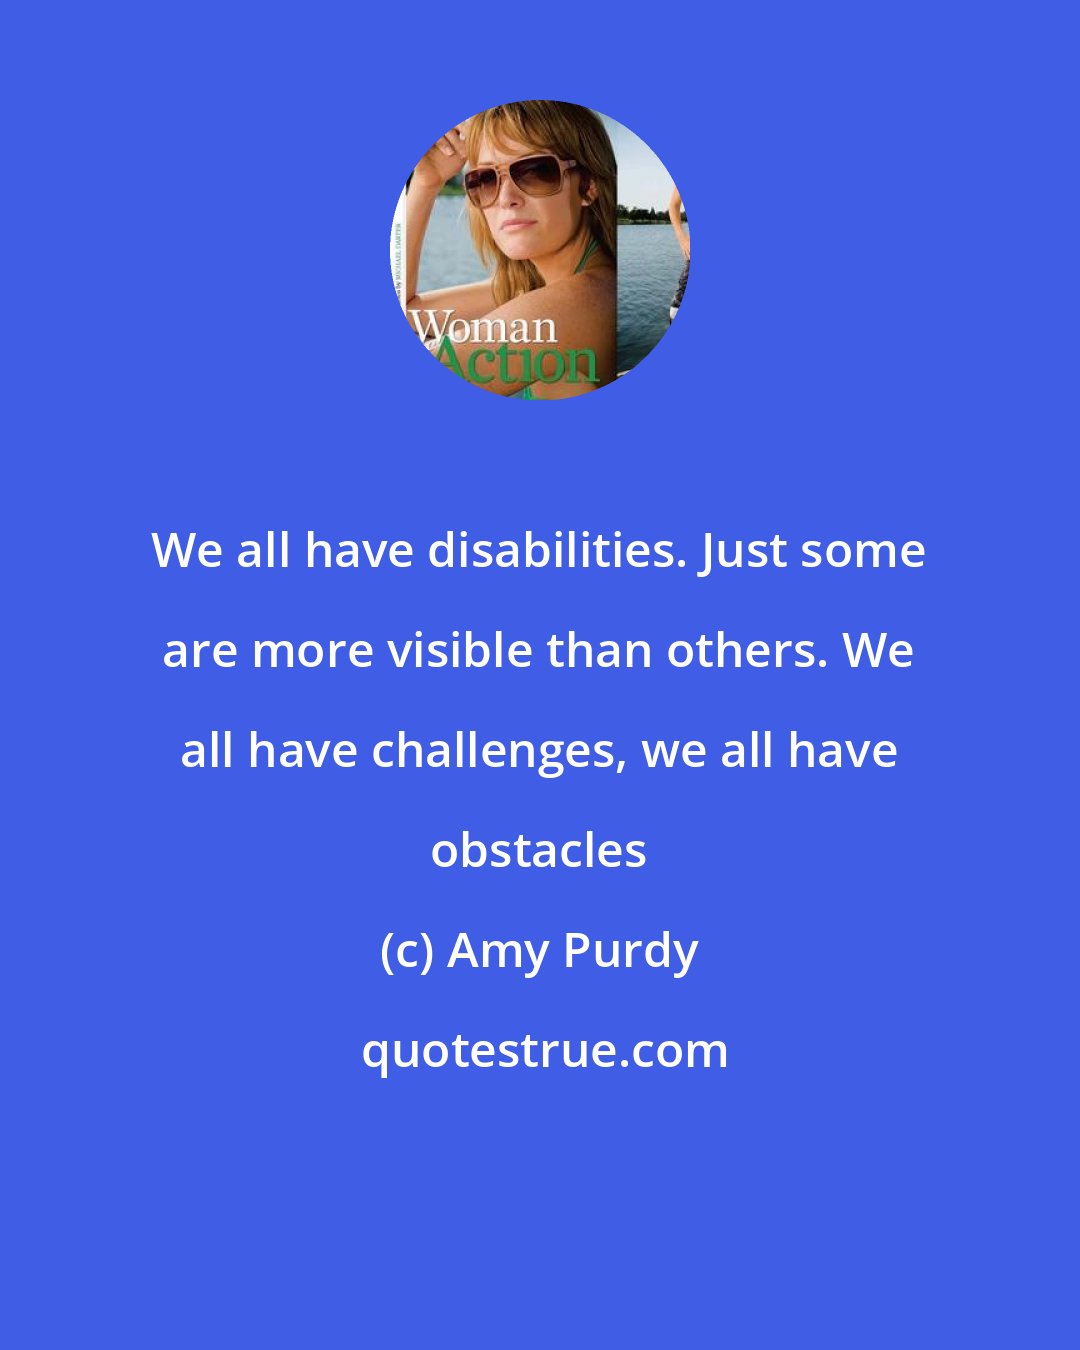 Amy Purdy: We all have disabilities. Just some are more visible than others. We all have challenges, we all have obstacles